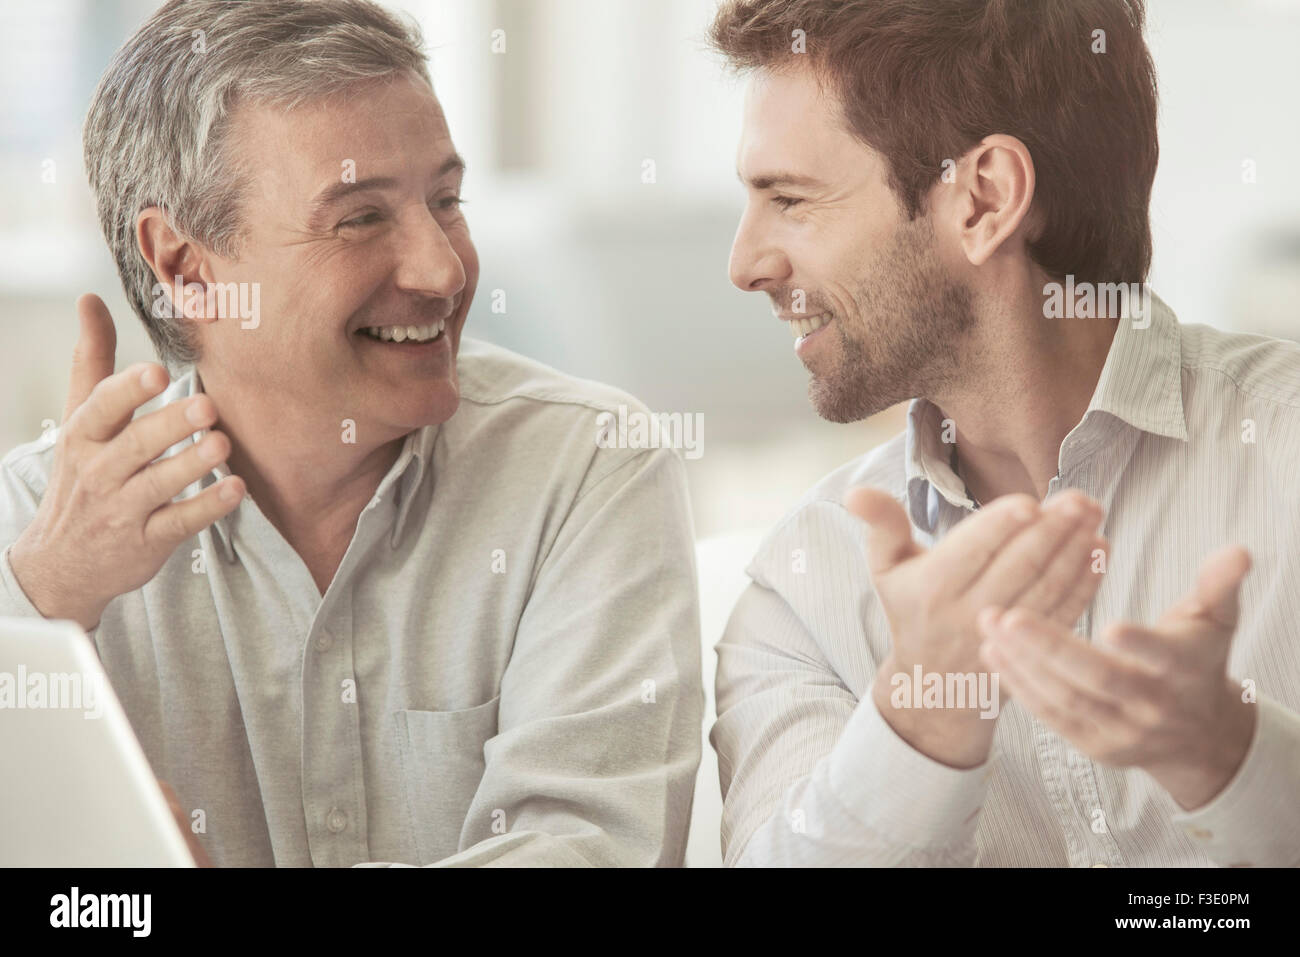 Colleagues talking and smiling together Stock Photo